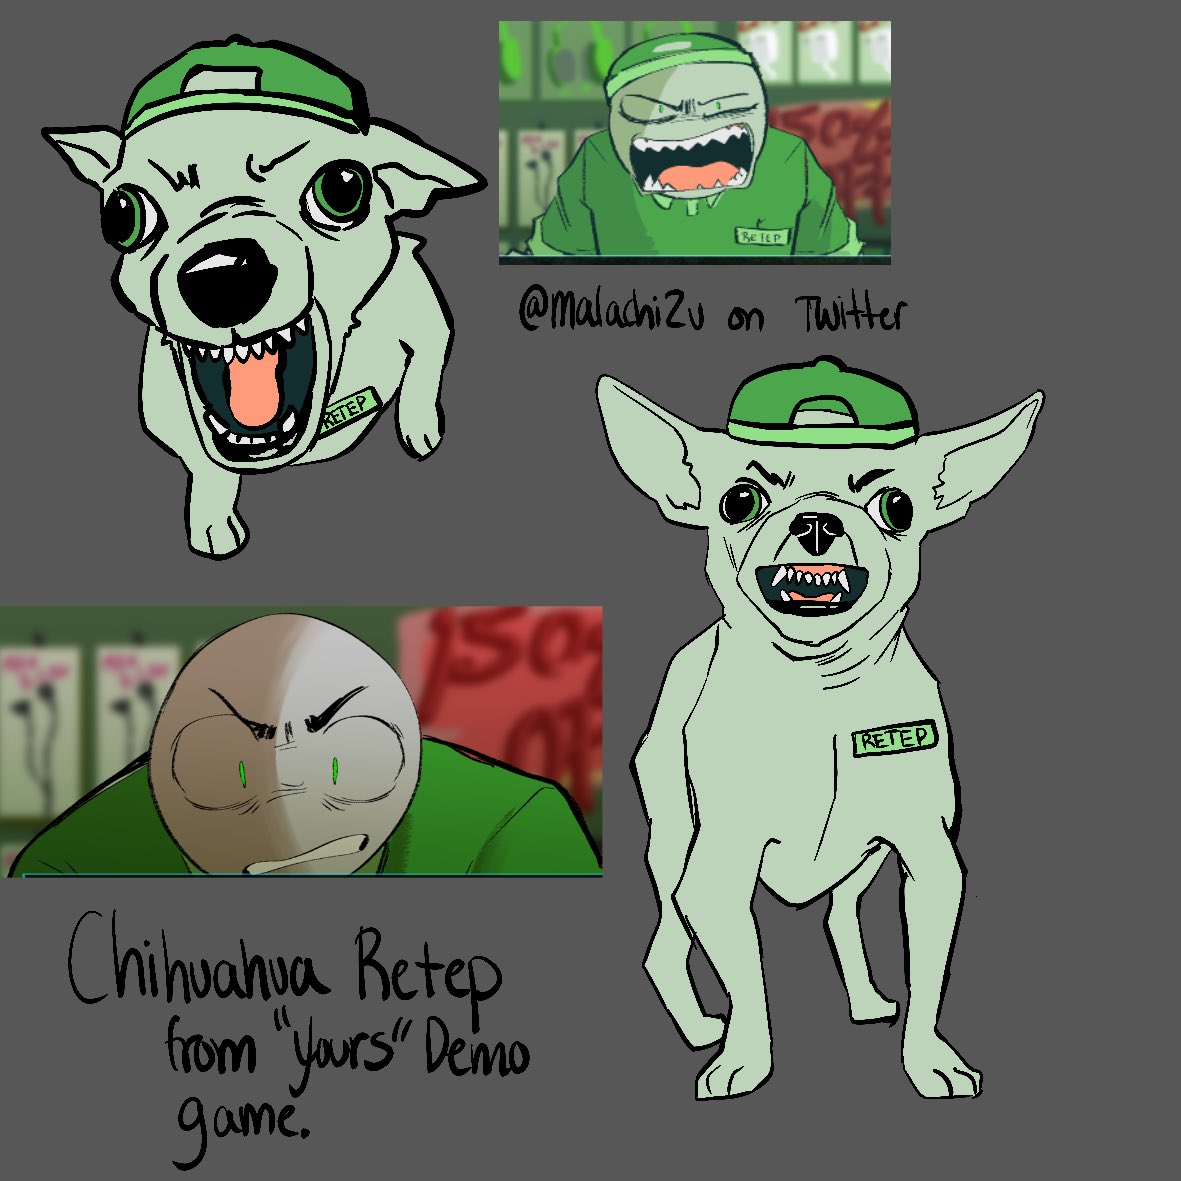 Streaming the “Yours” demo game in the new discord server and we got into the topic of Retep being like an angry chihuahua, so I had to draw it.

SPOILERS BTW???? I guess???

#Yoursdemo